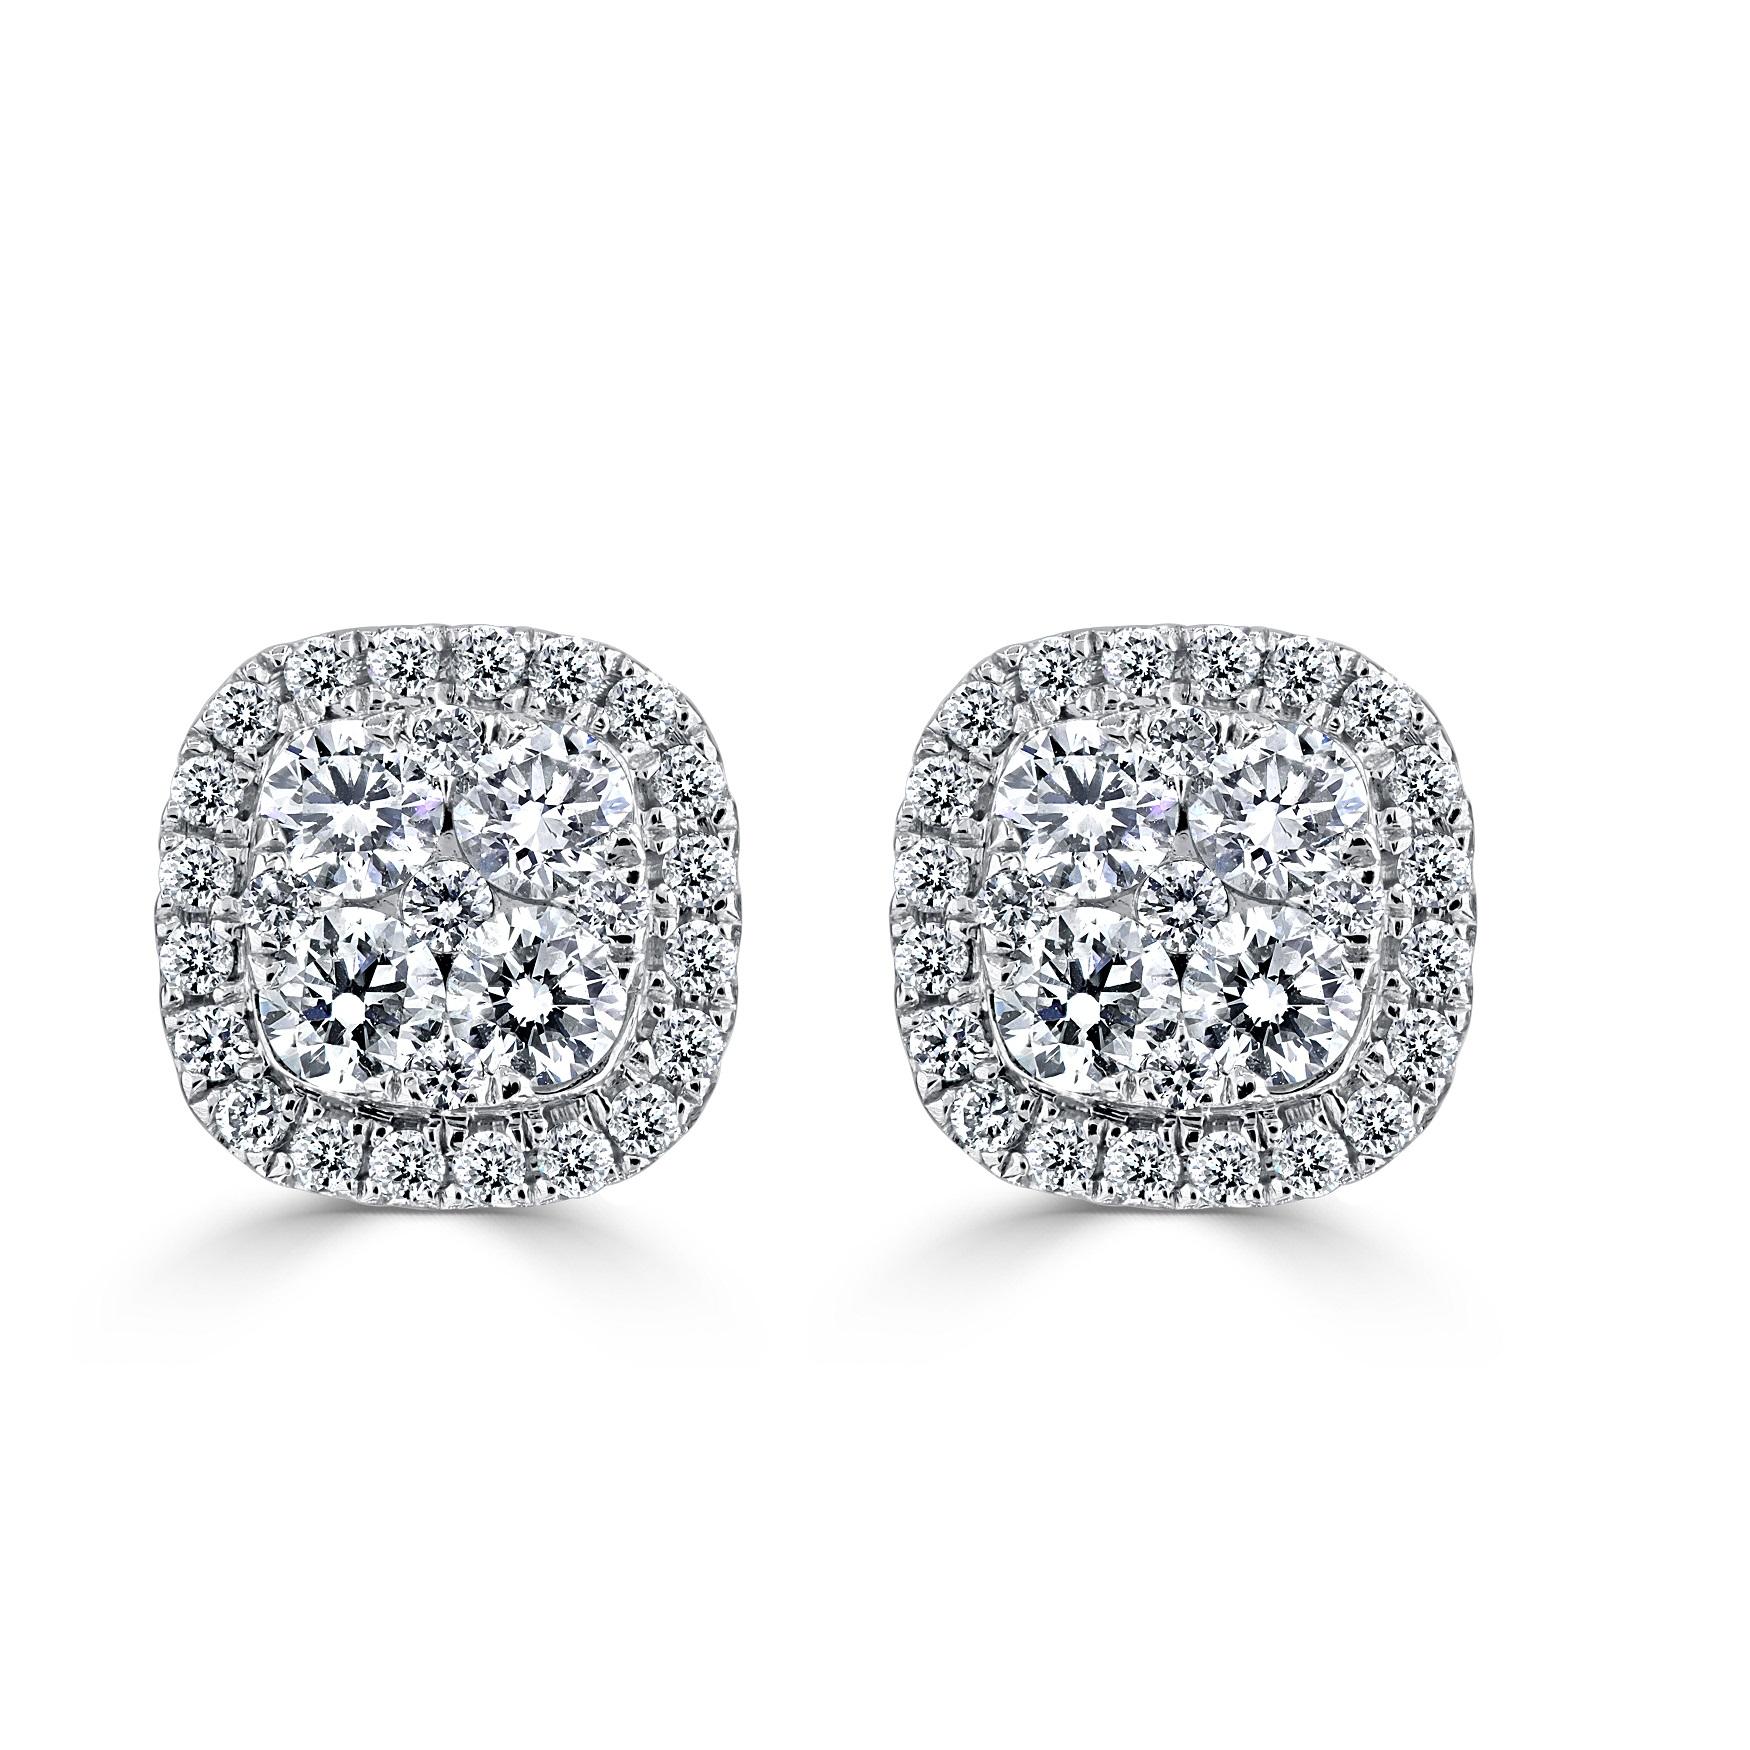 0.98 Carat Natural Diamond Illusion Cushion Halo Earrings in 18k White ref1178 In New Condition For Sale In New York, NY